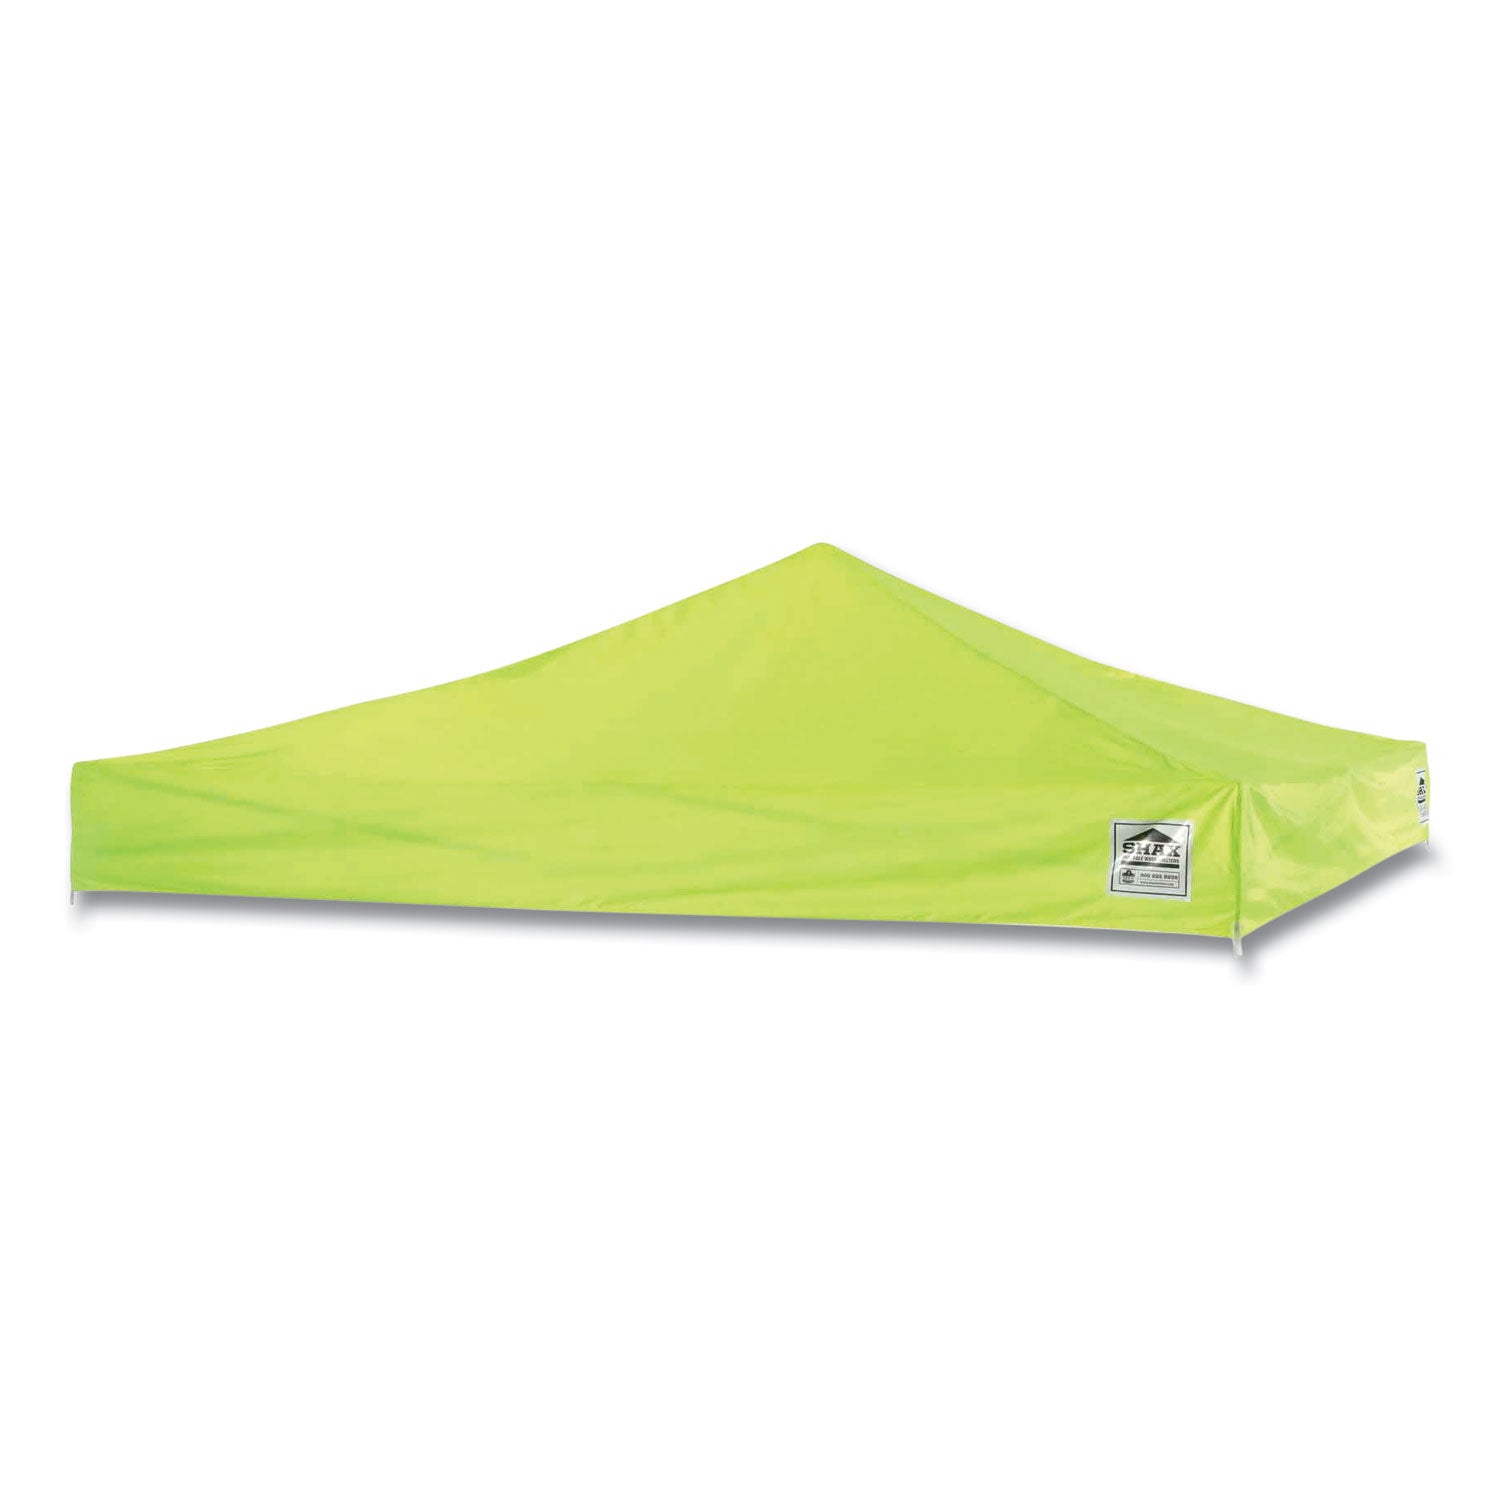 shax-6010c-replacement-pop-up-tent-canopy-for-6010-10-ft-x-10-ft-polyester-lime-ships-in-1-3-business-days_ego12911 - 1